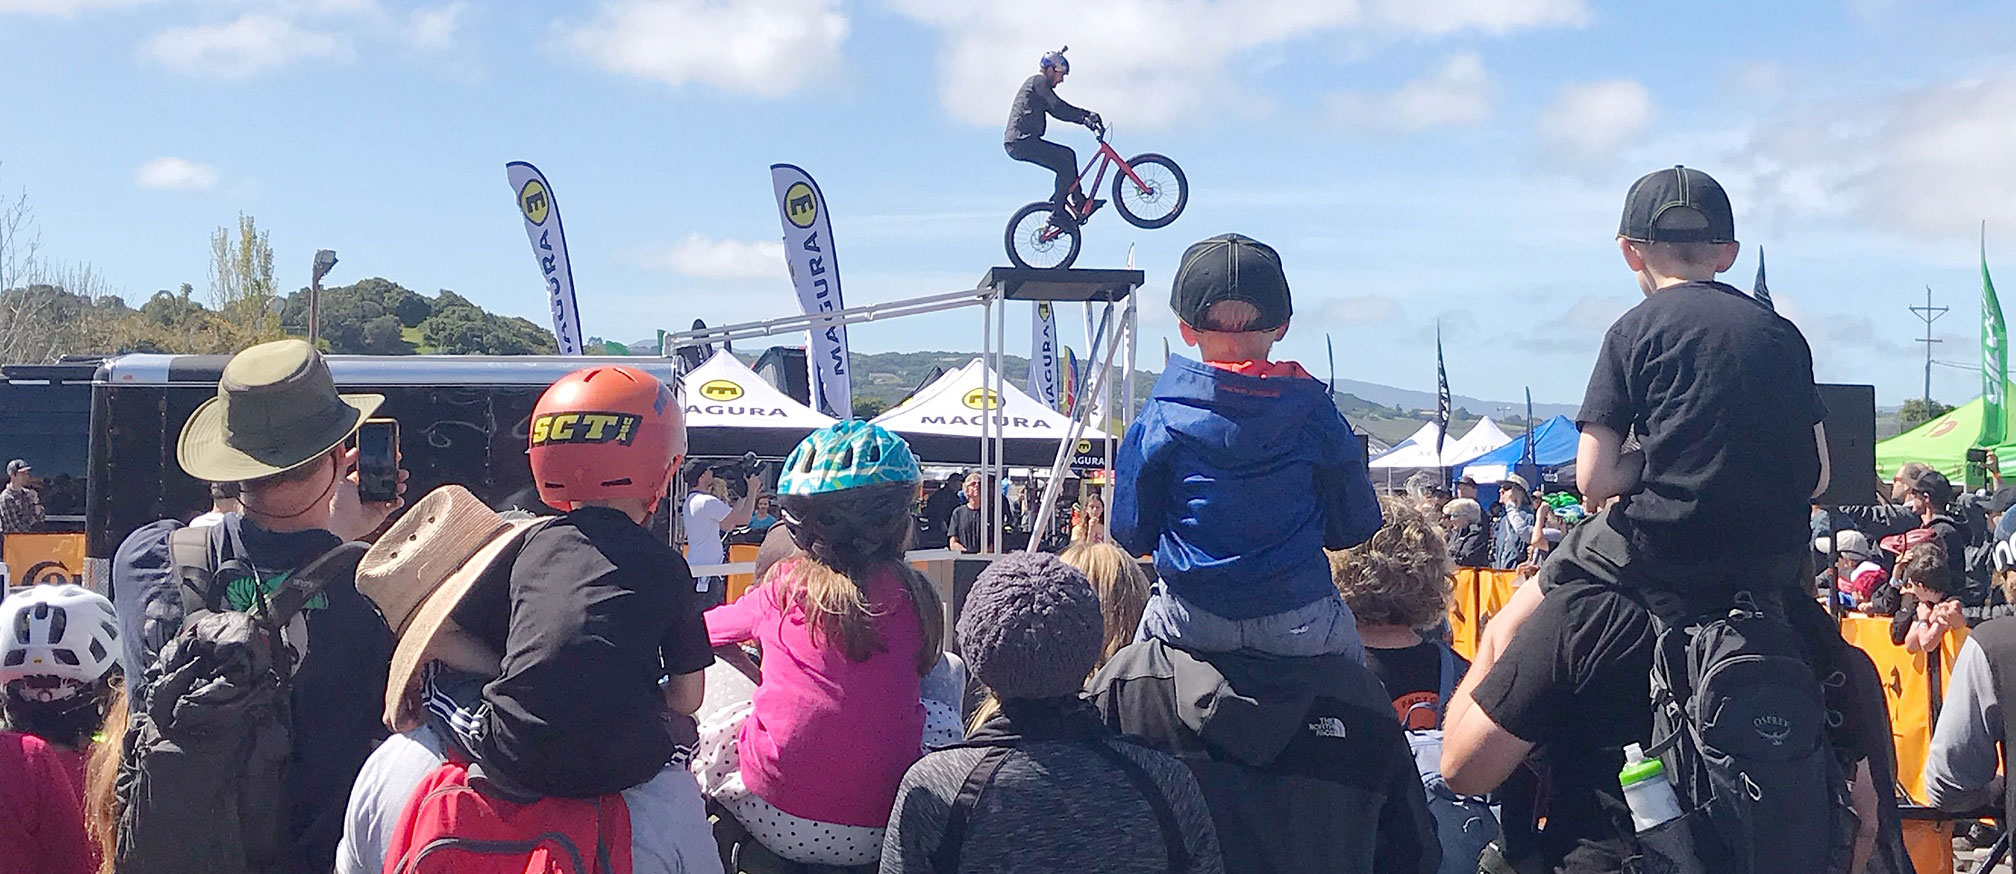 Military Discounts - Life Time Sea Otter Classic